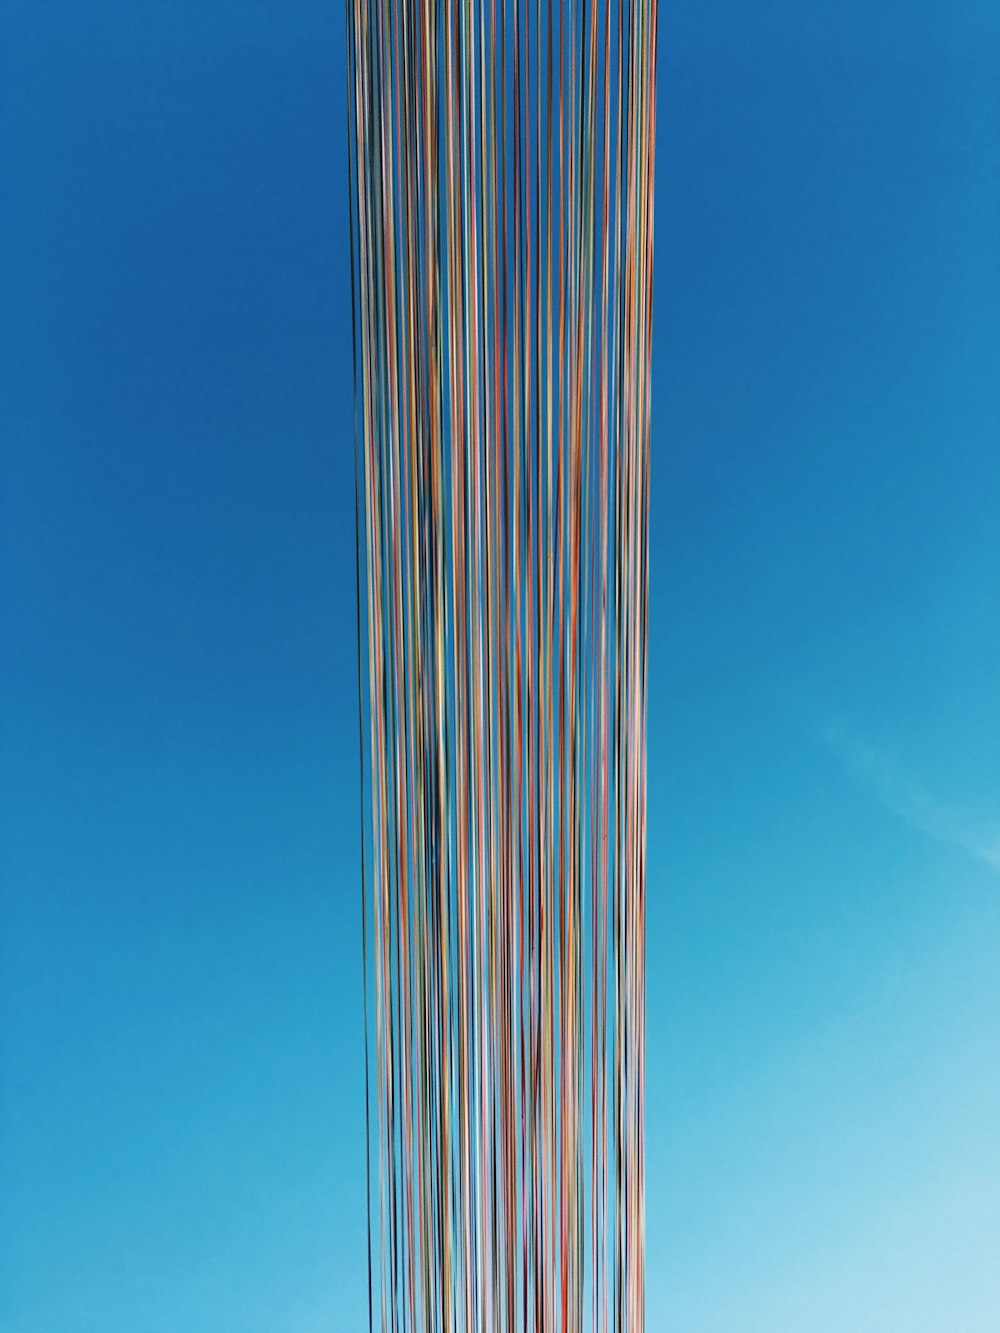 white and blue striped tower under blue sky